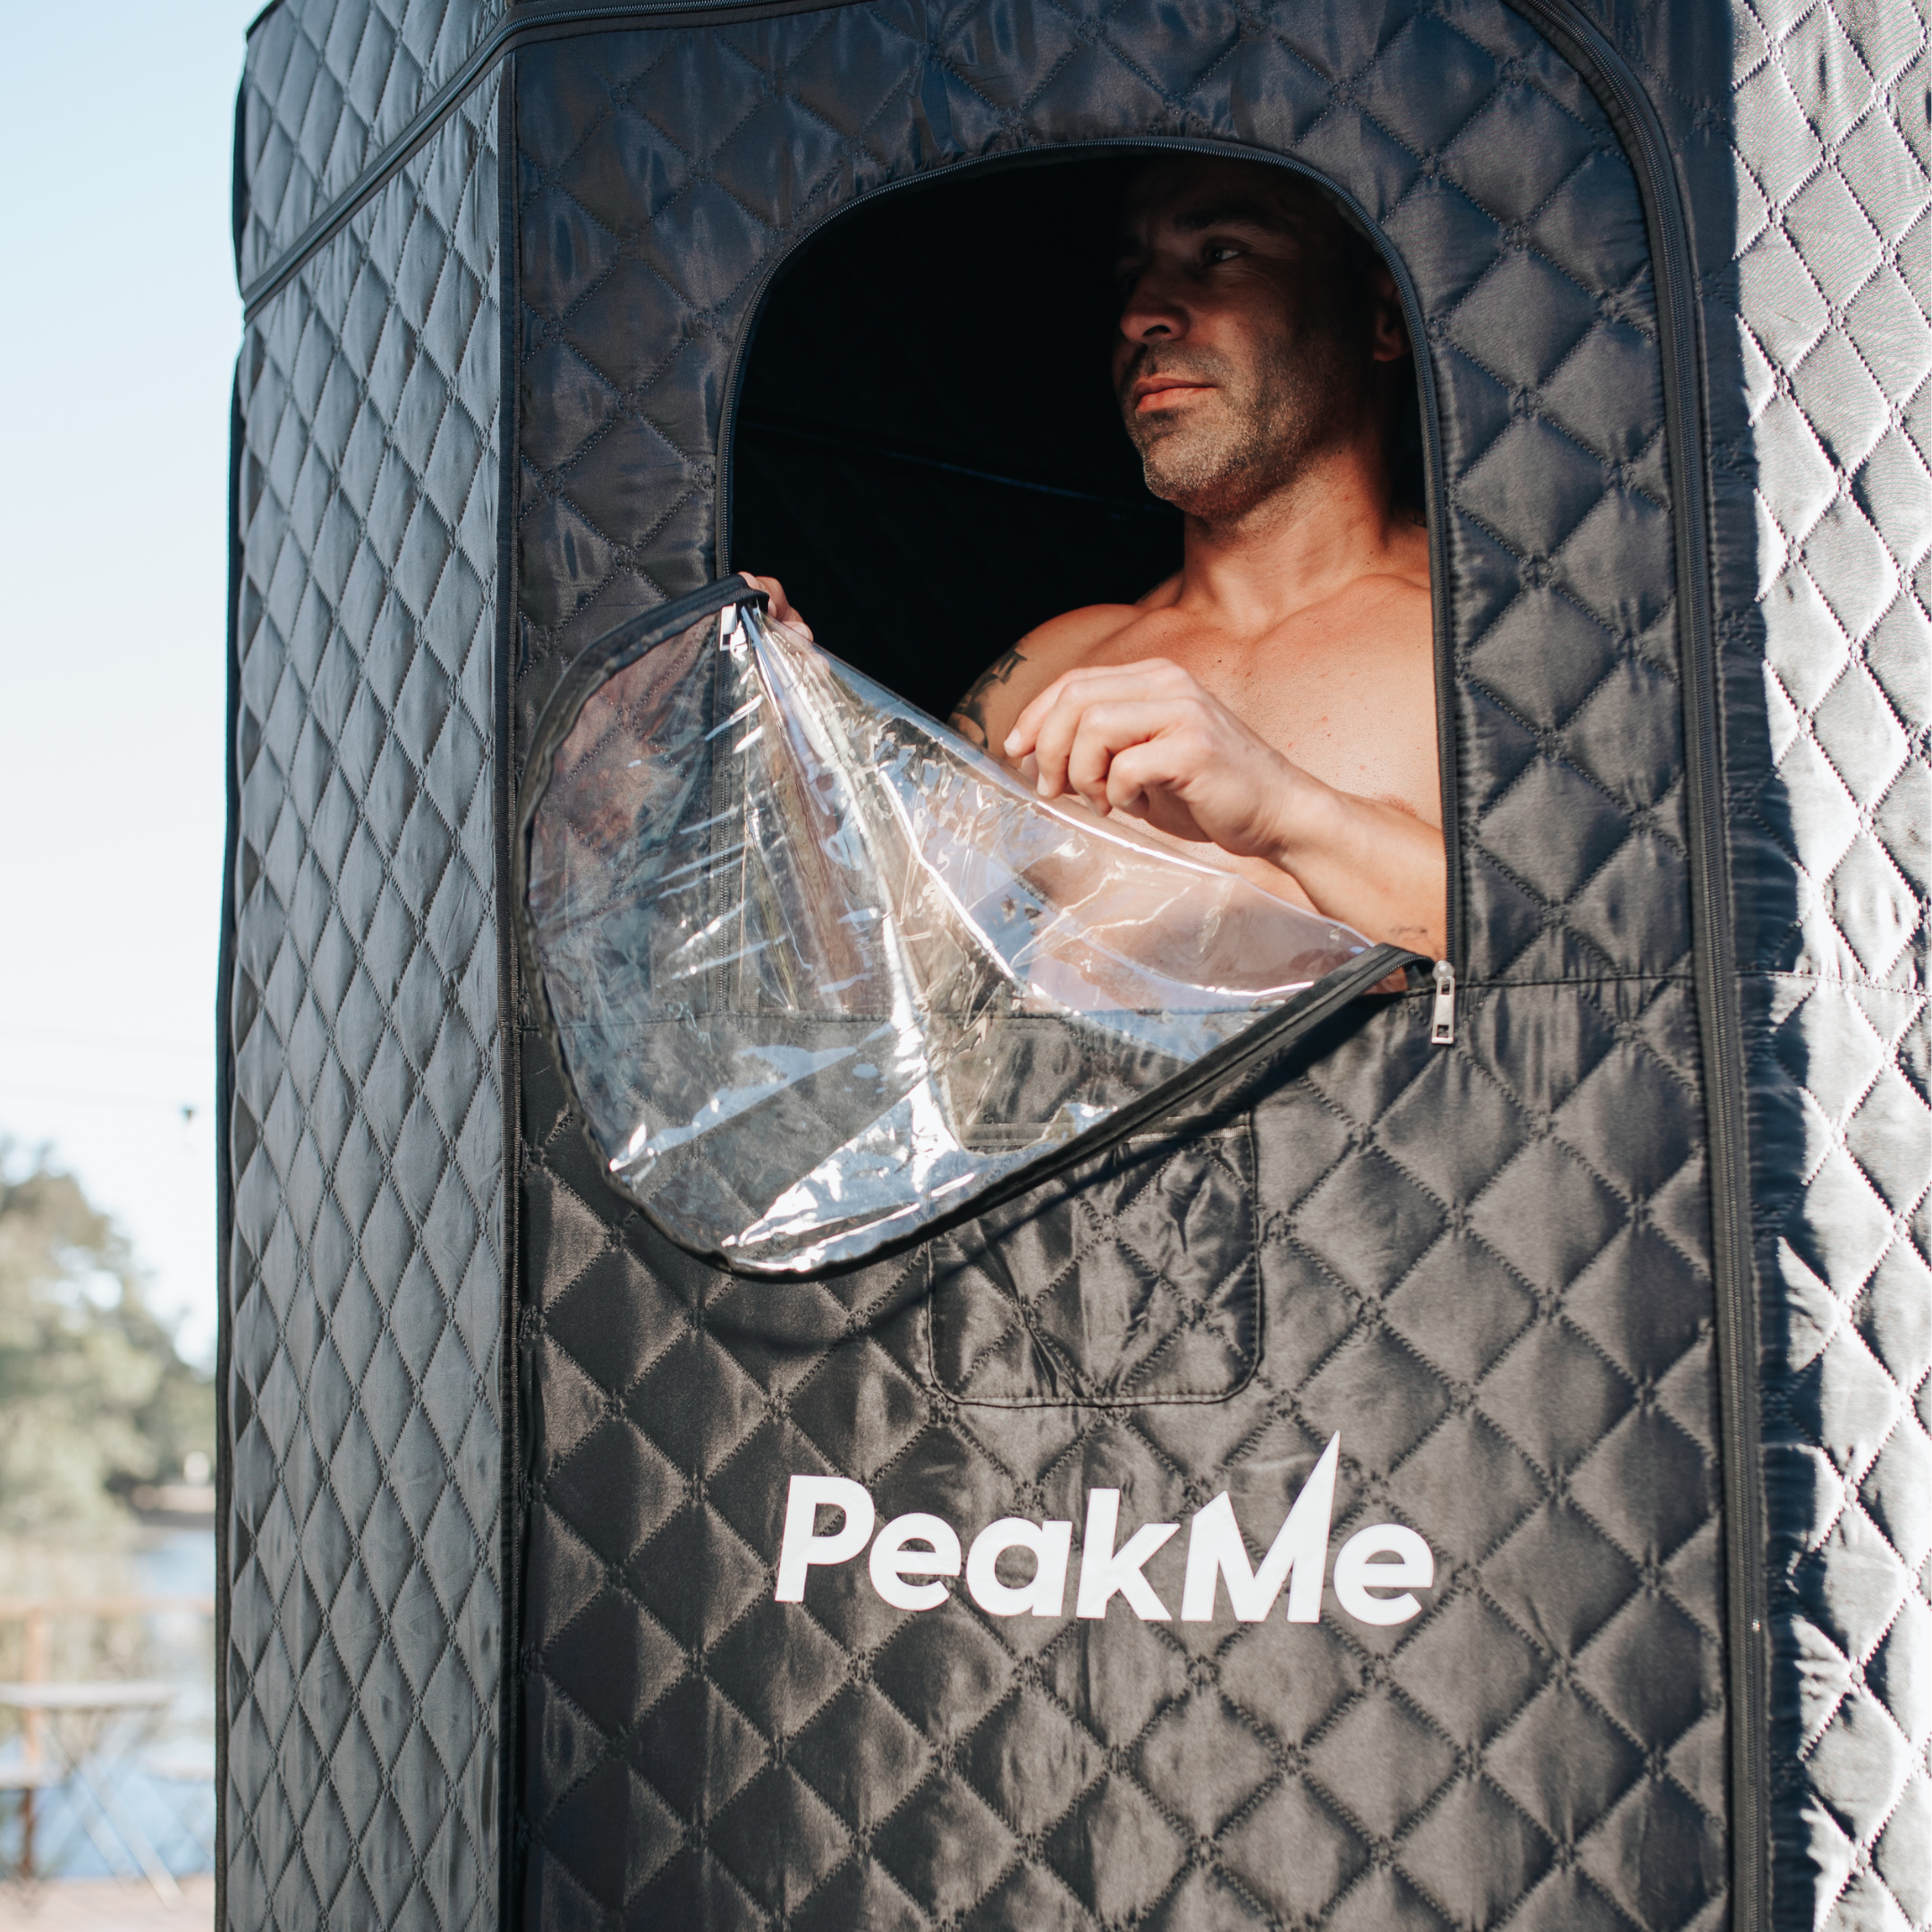 Man peering out from a PeakMe sauna tent, engaged in a personal heat therapy session, enhancing wellness with a home sauna experience.